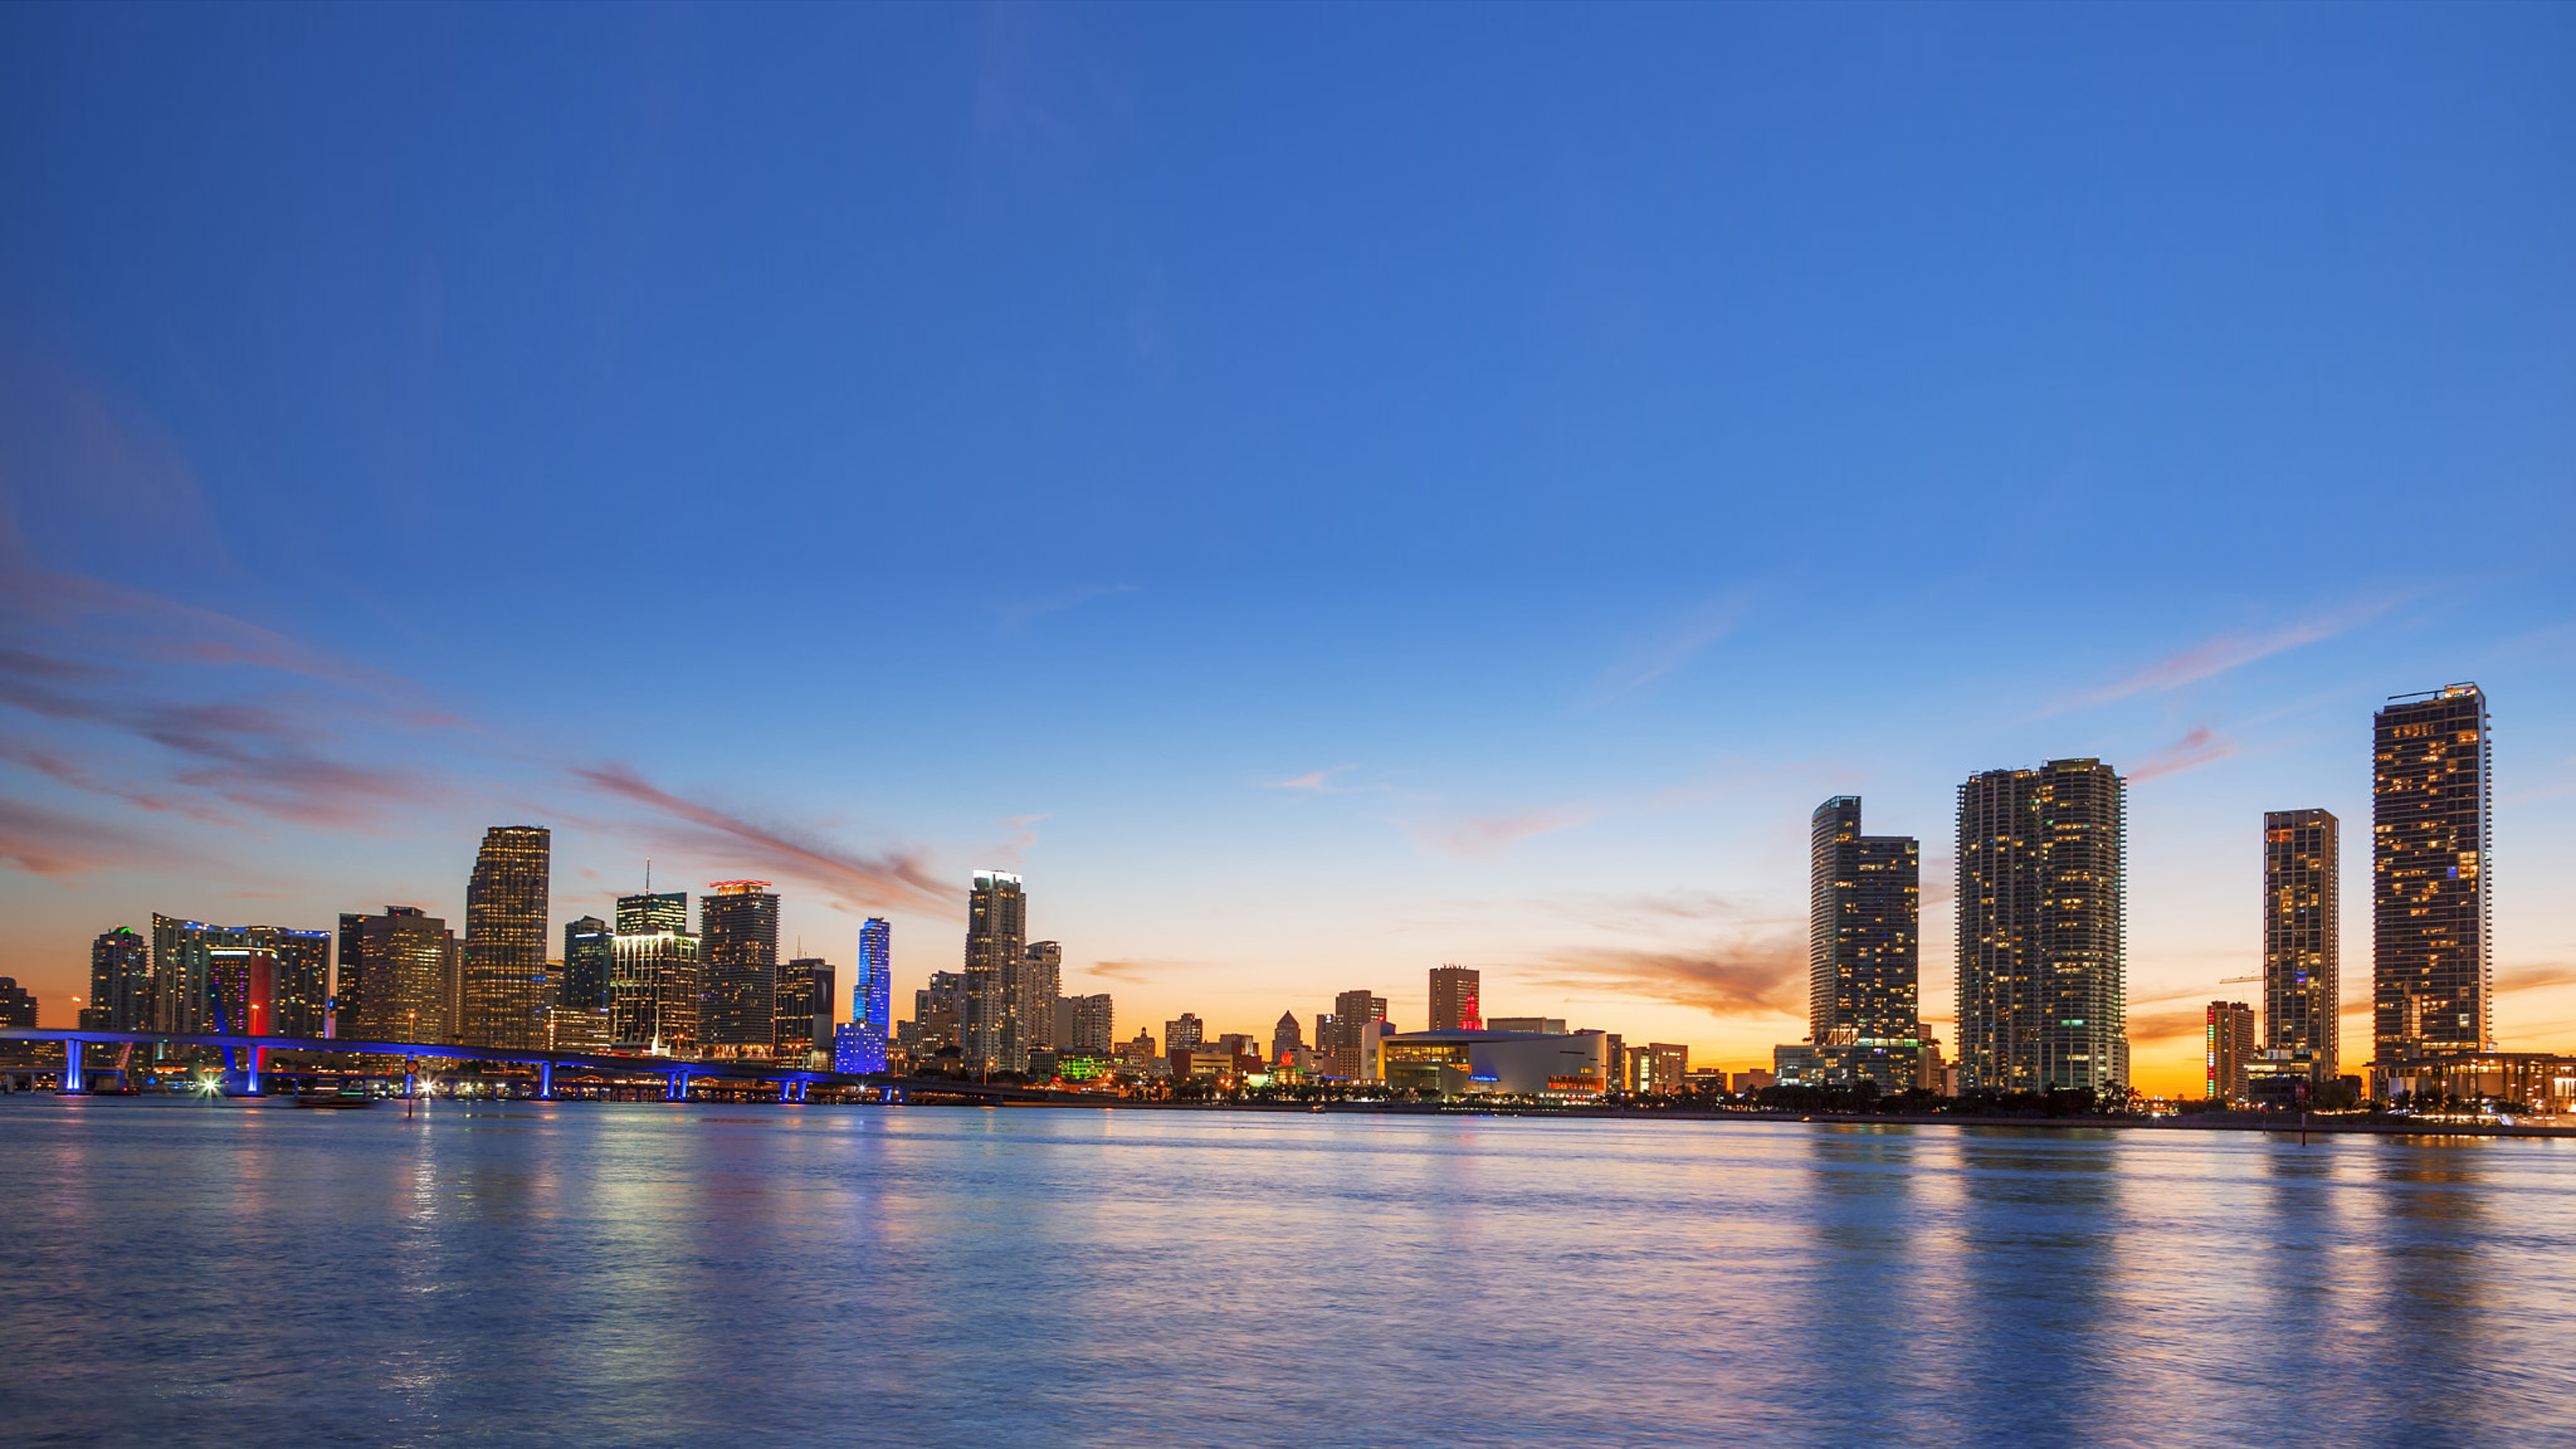 City In Florida Usa Miami At Sunset Panorama 4k Ultra Hd Wallpaper For